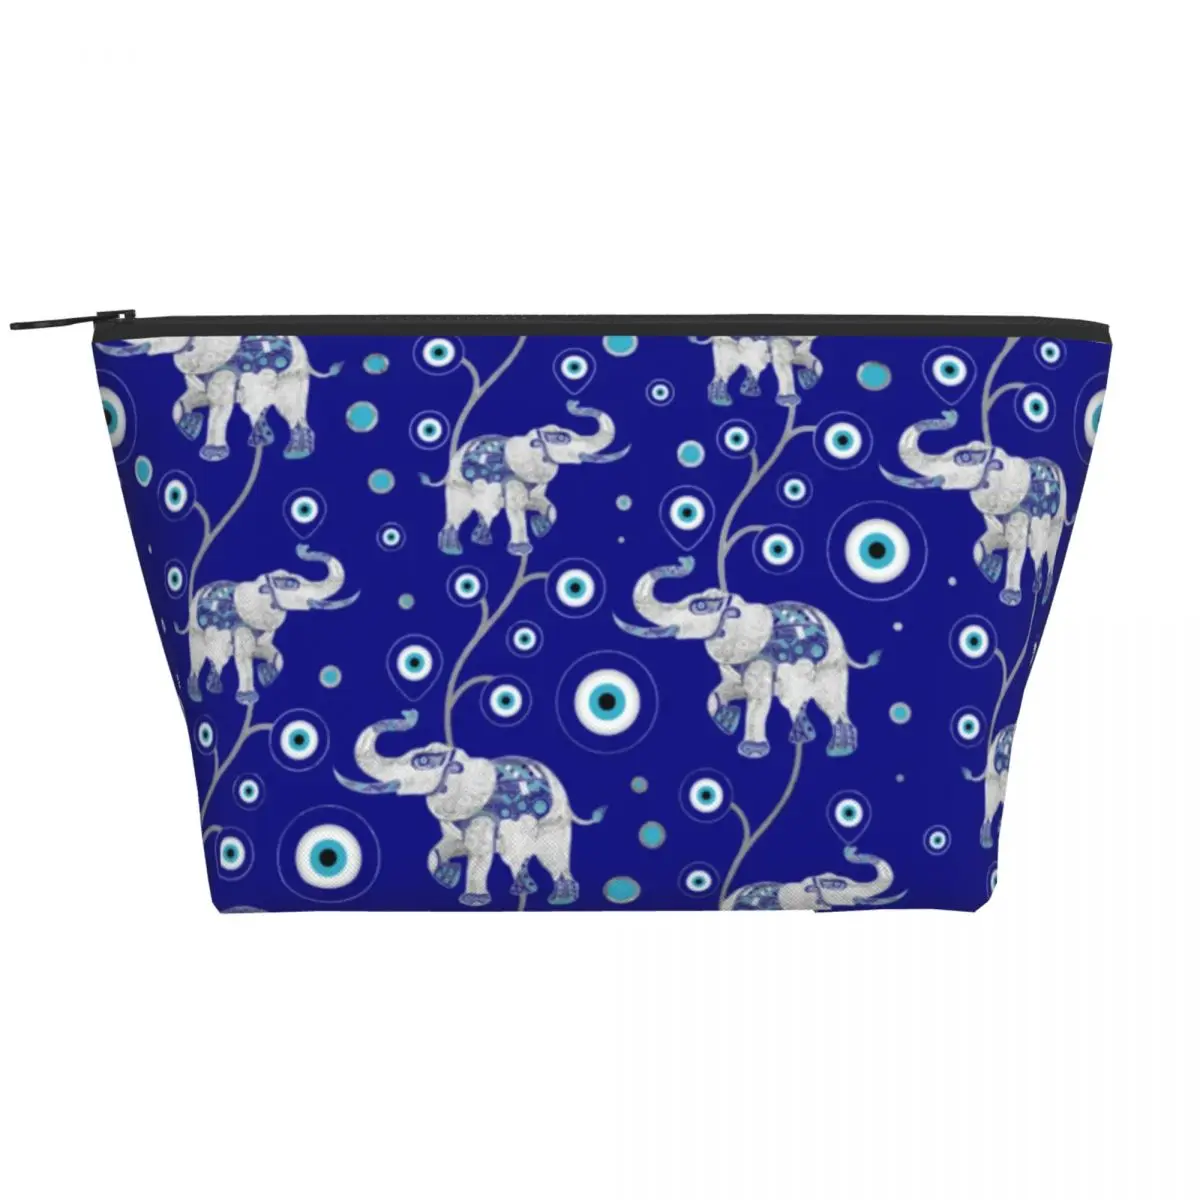 

Evil Eye Elephant Zipper Storage Organizers Good Luck Amulet Multi-purpose Makeup Pouch Daily Woman Cosmetic Bags